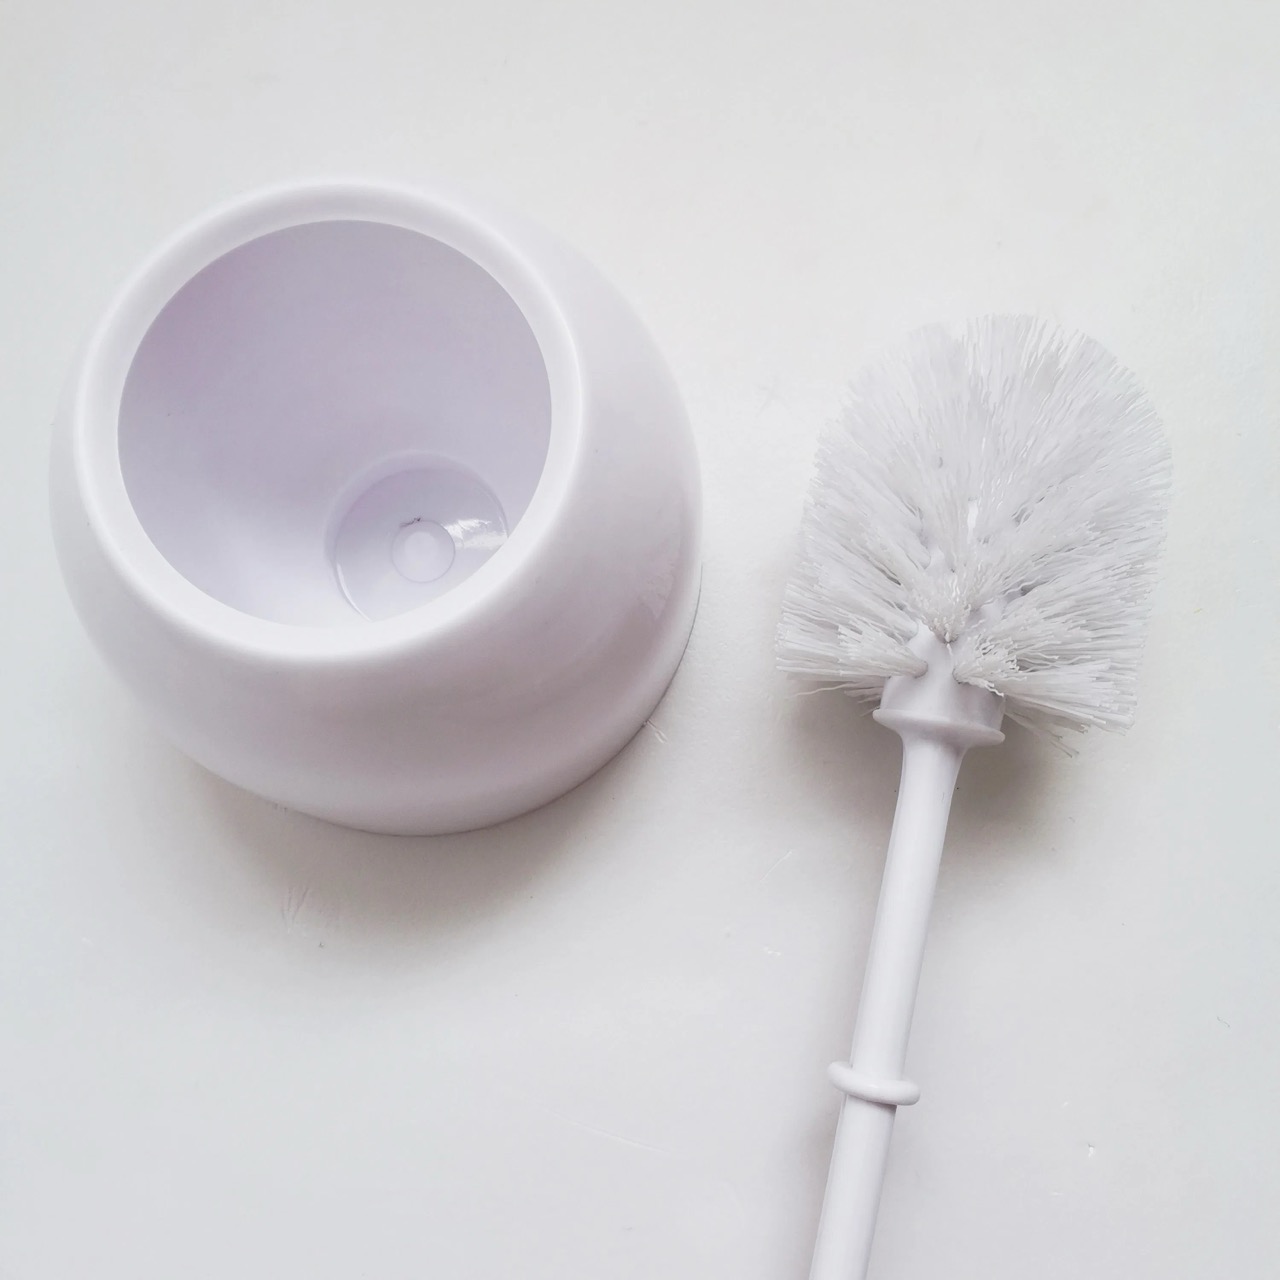 How To Clean A Toilet Brush And Holder